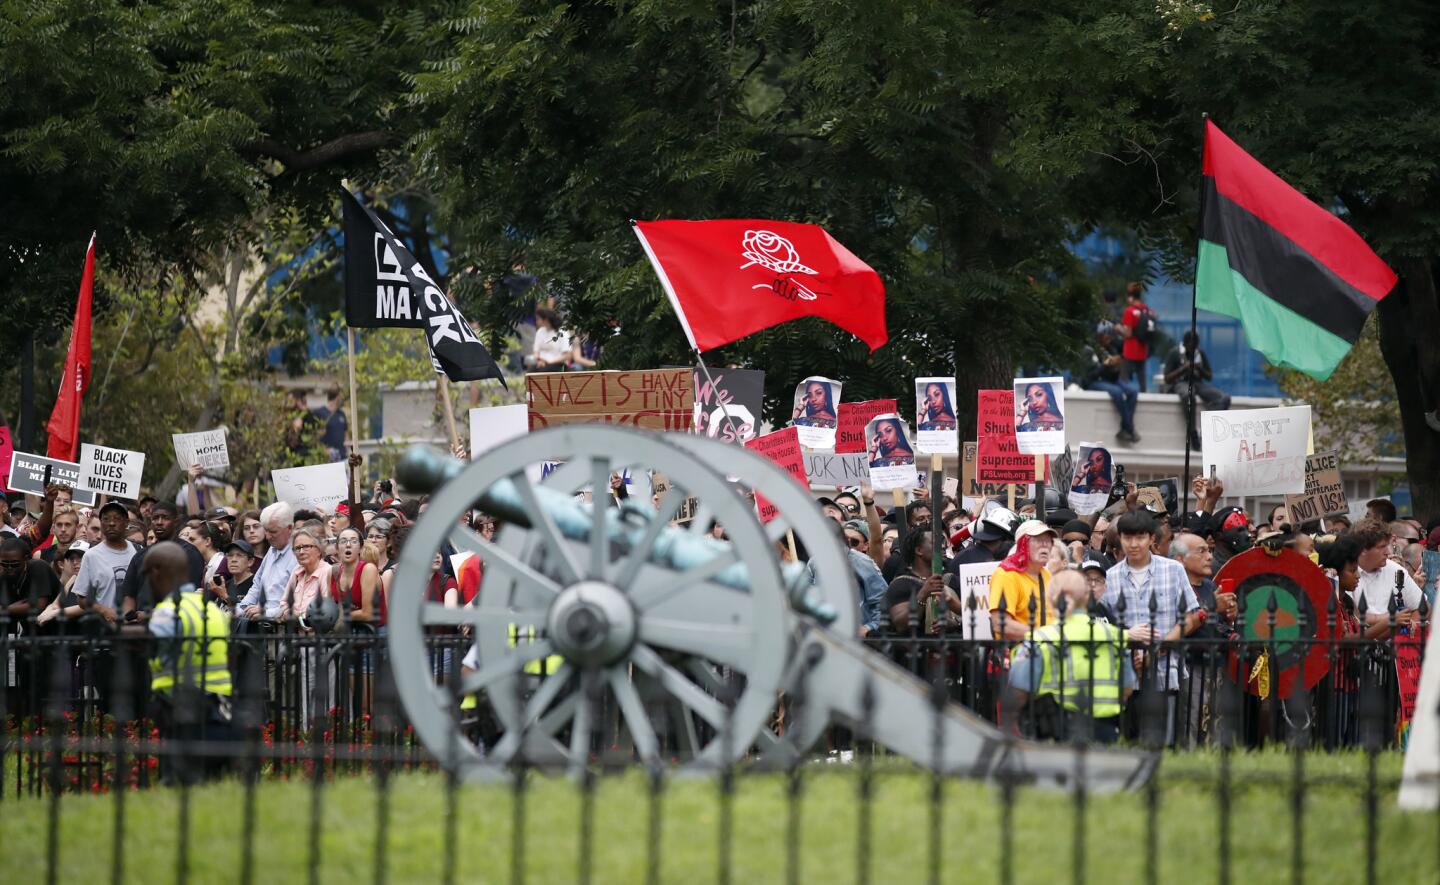 Demonstrators rally near the White House on the one-year anniversary of the Charlottesville "Unite the Right" rally on Aug. 12, 2018.